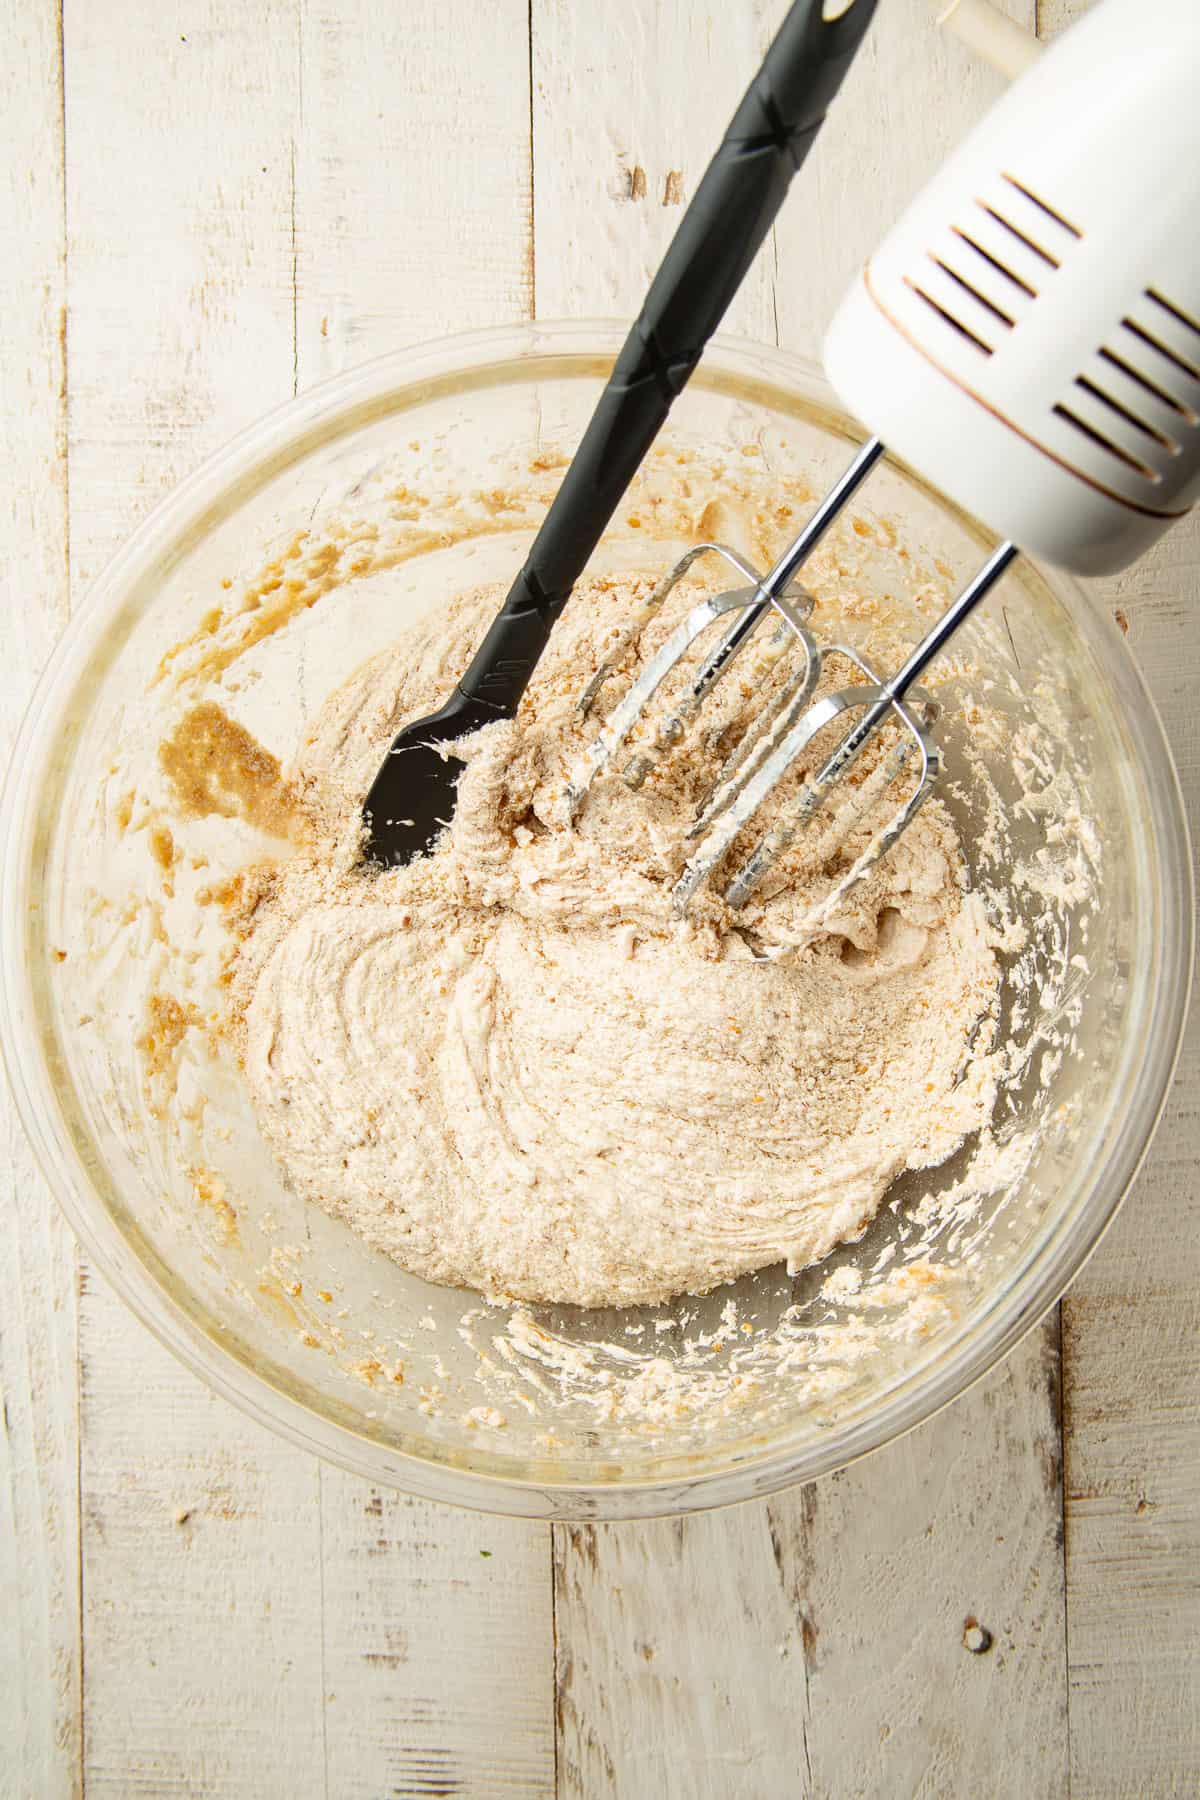 Mixture of wet ingredients for cookie bar dough in a mixing bowl with an electric mixer and spatula.